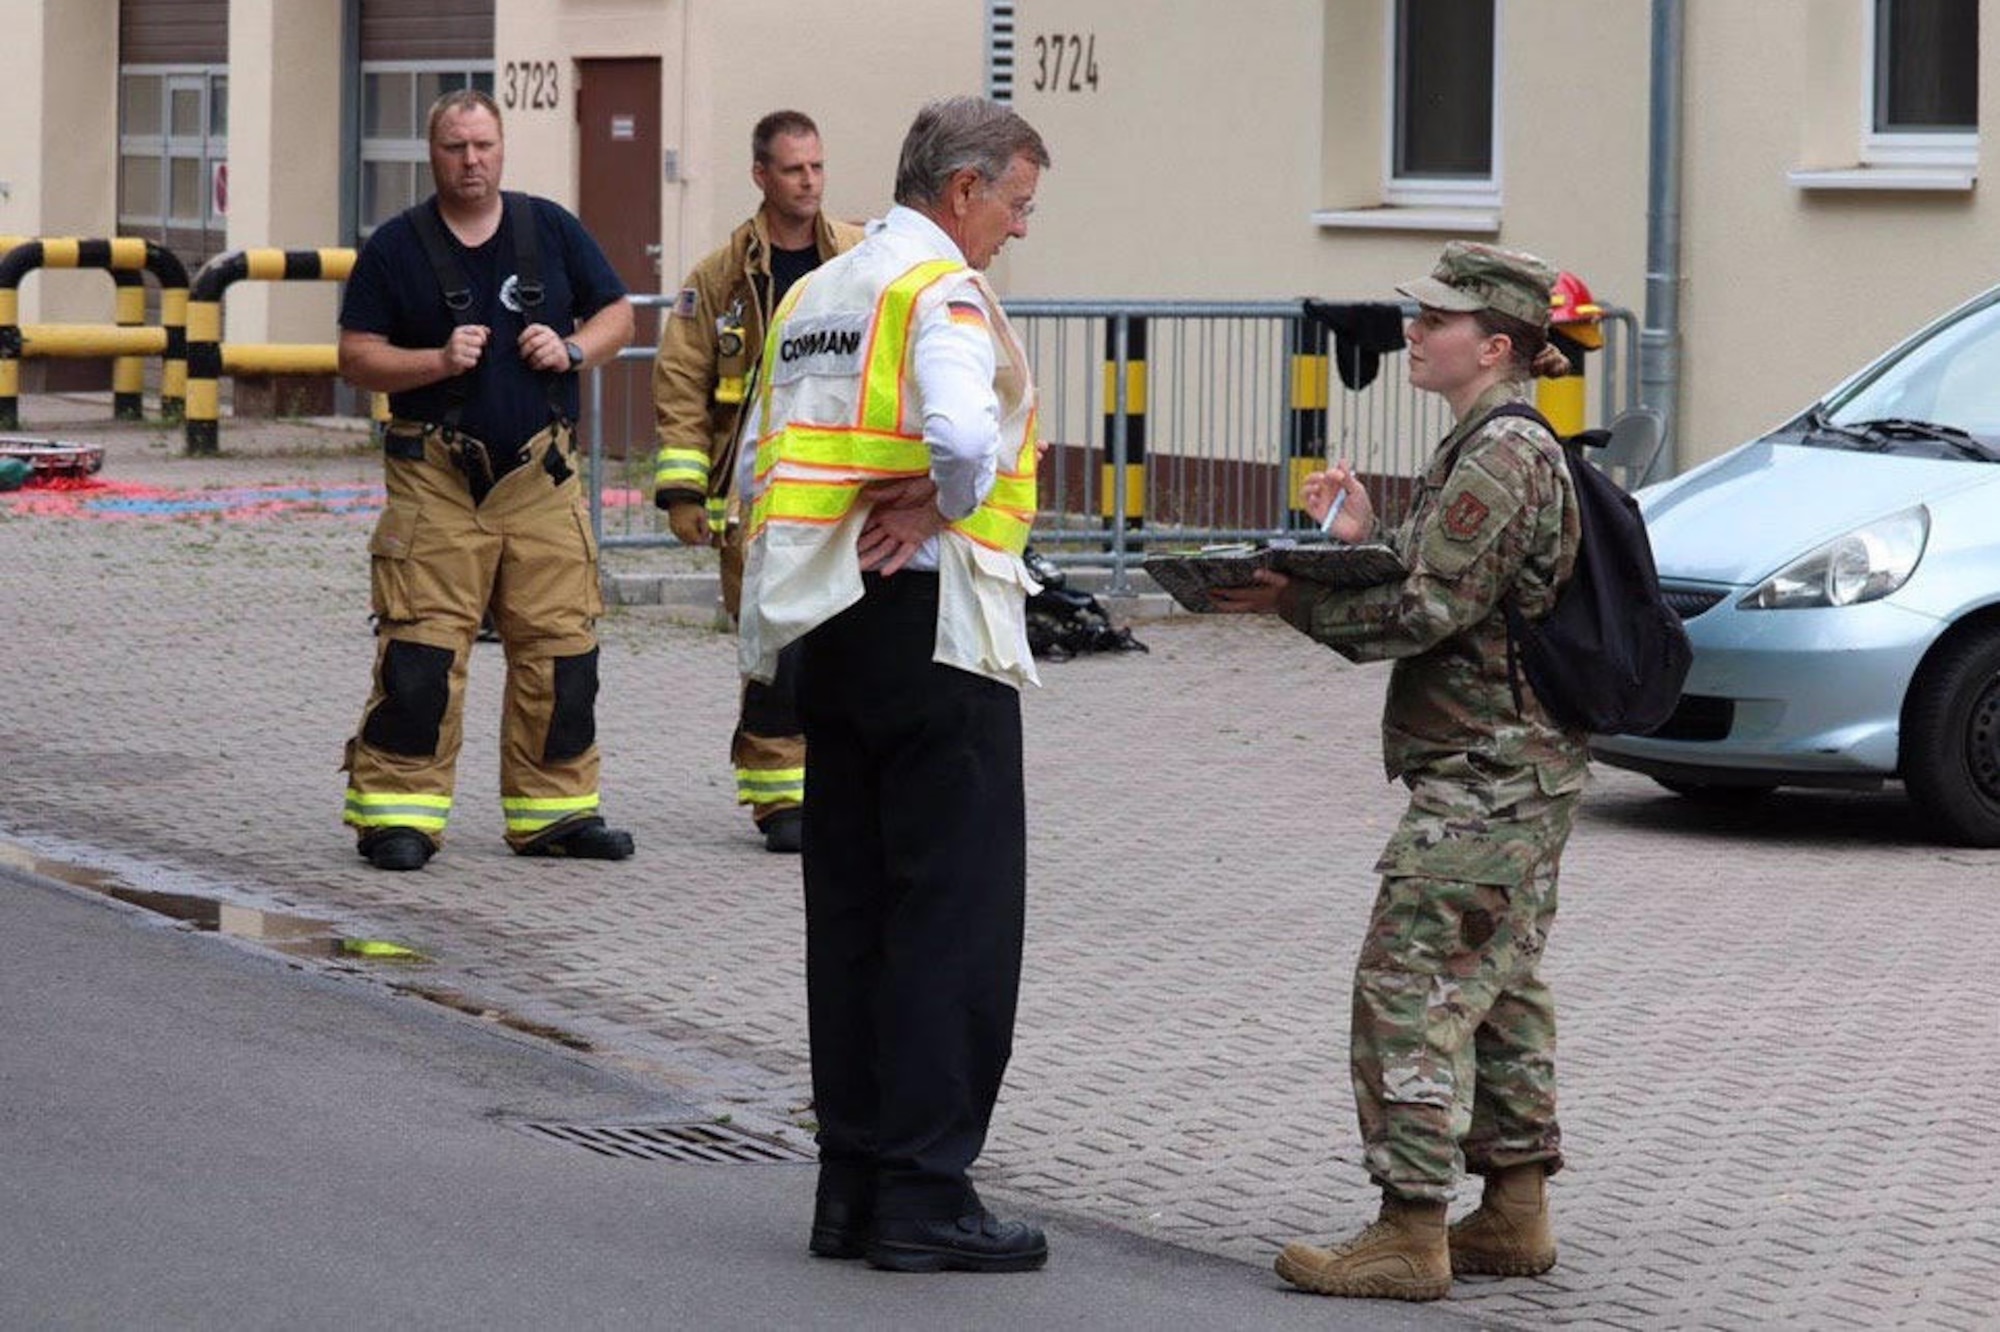 U.S. Air Force Master Sgt. Jessica Clayton, 786th Civil Engineer Squadron Emergency Management Operations noncommissioned officer in charge, briefs response options to the incident commander at Landstuhl Regional Medical Center, Germany, June 16, 2020.